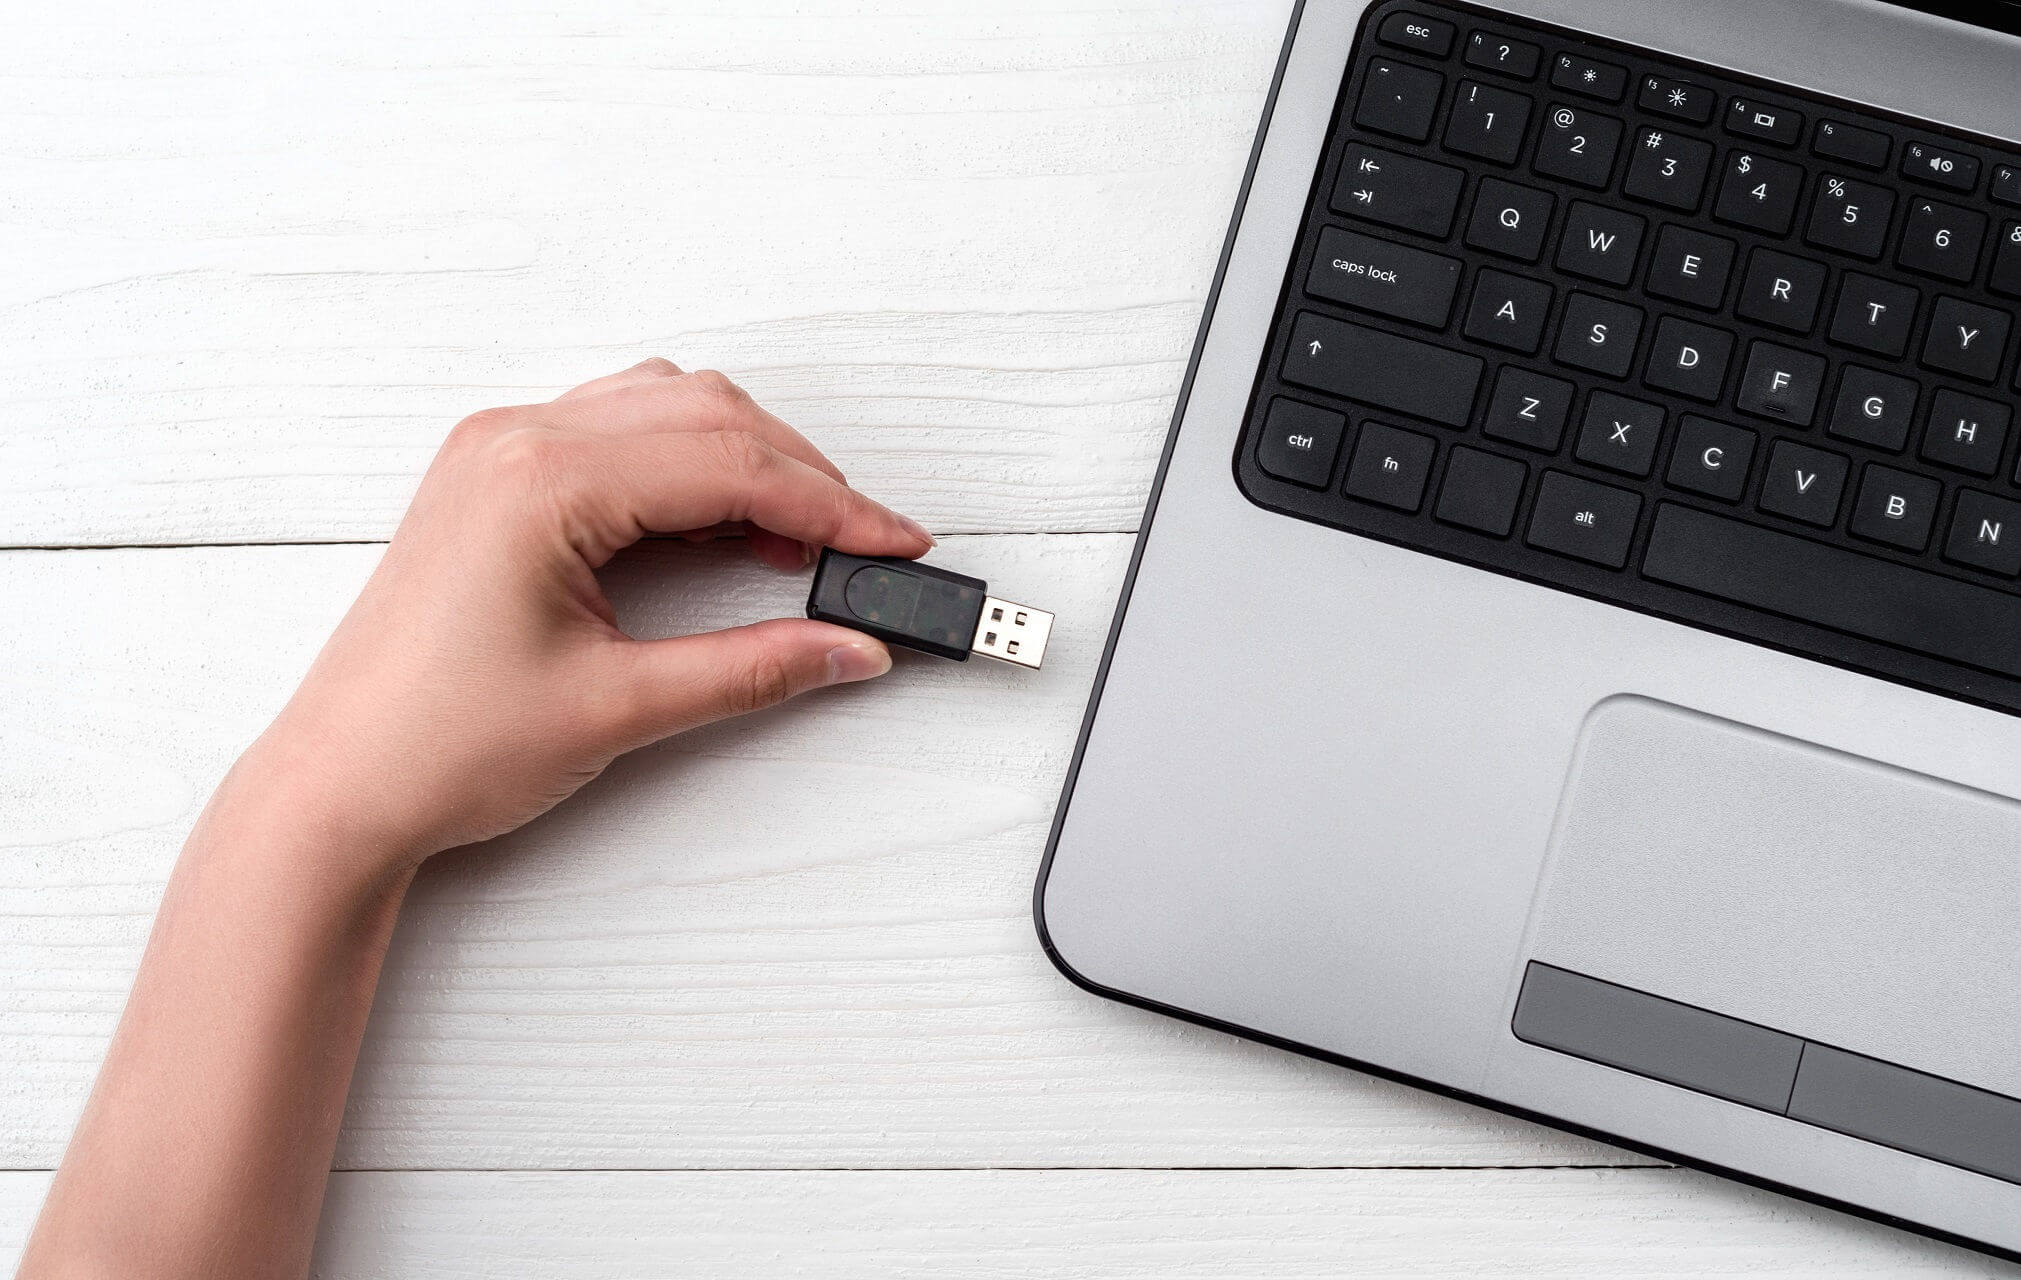 How To Recover Deleted Files From USB Without Software